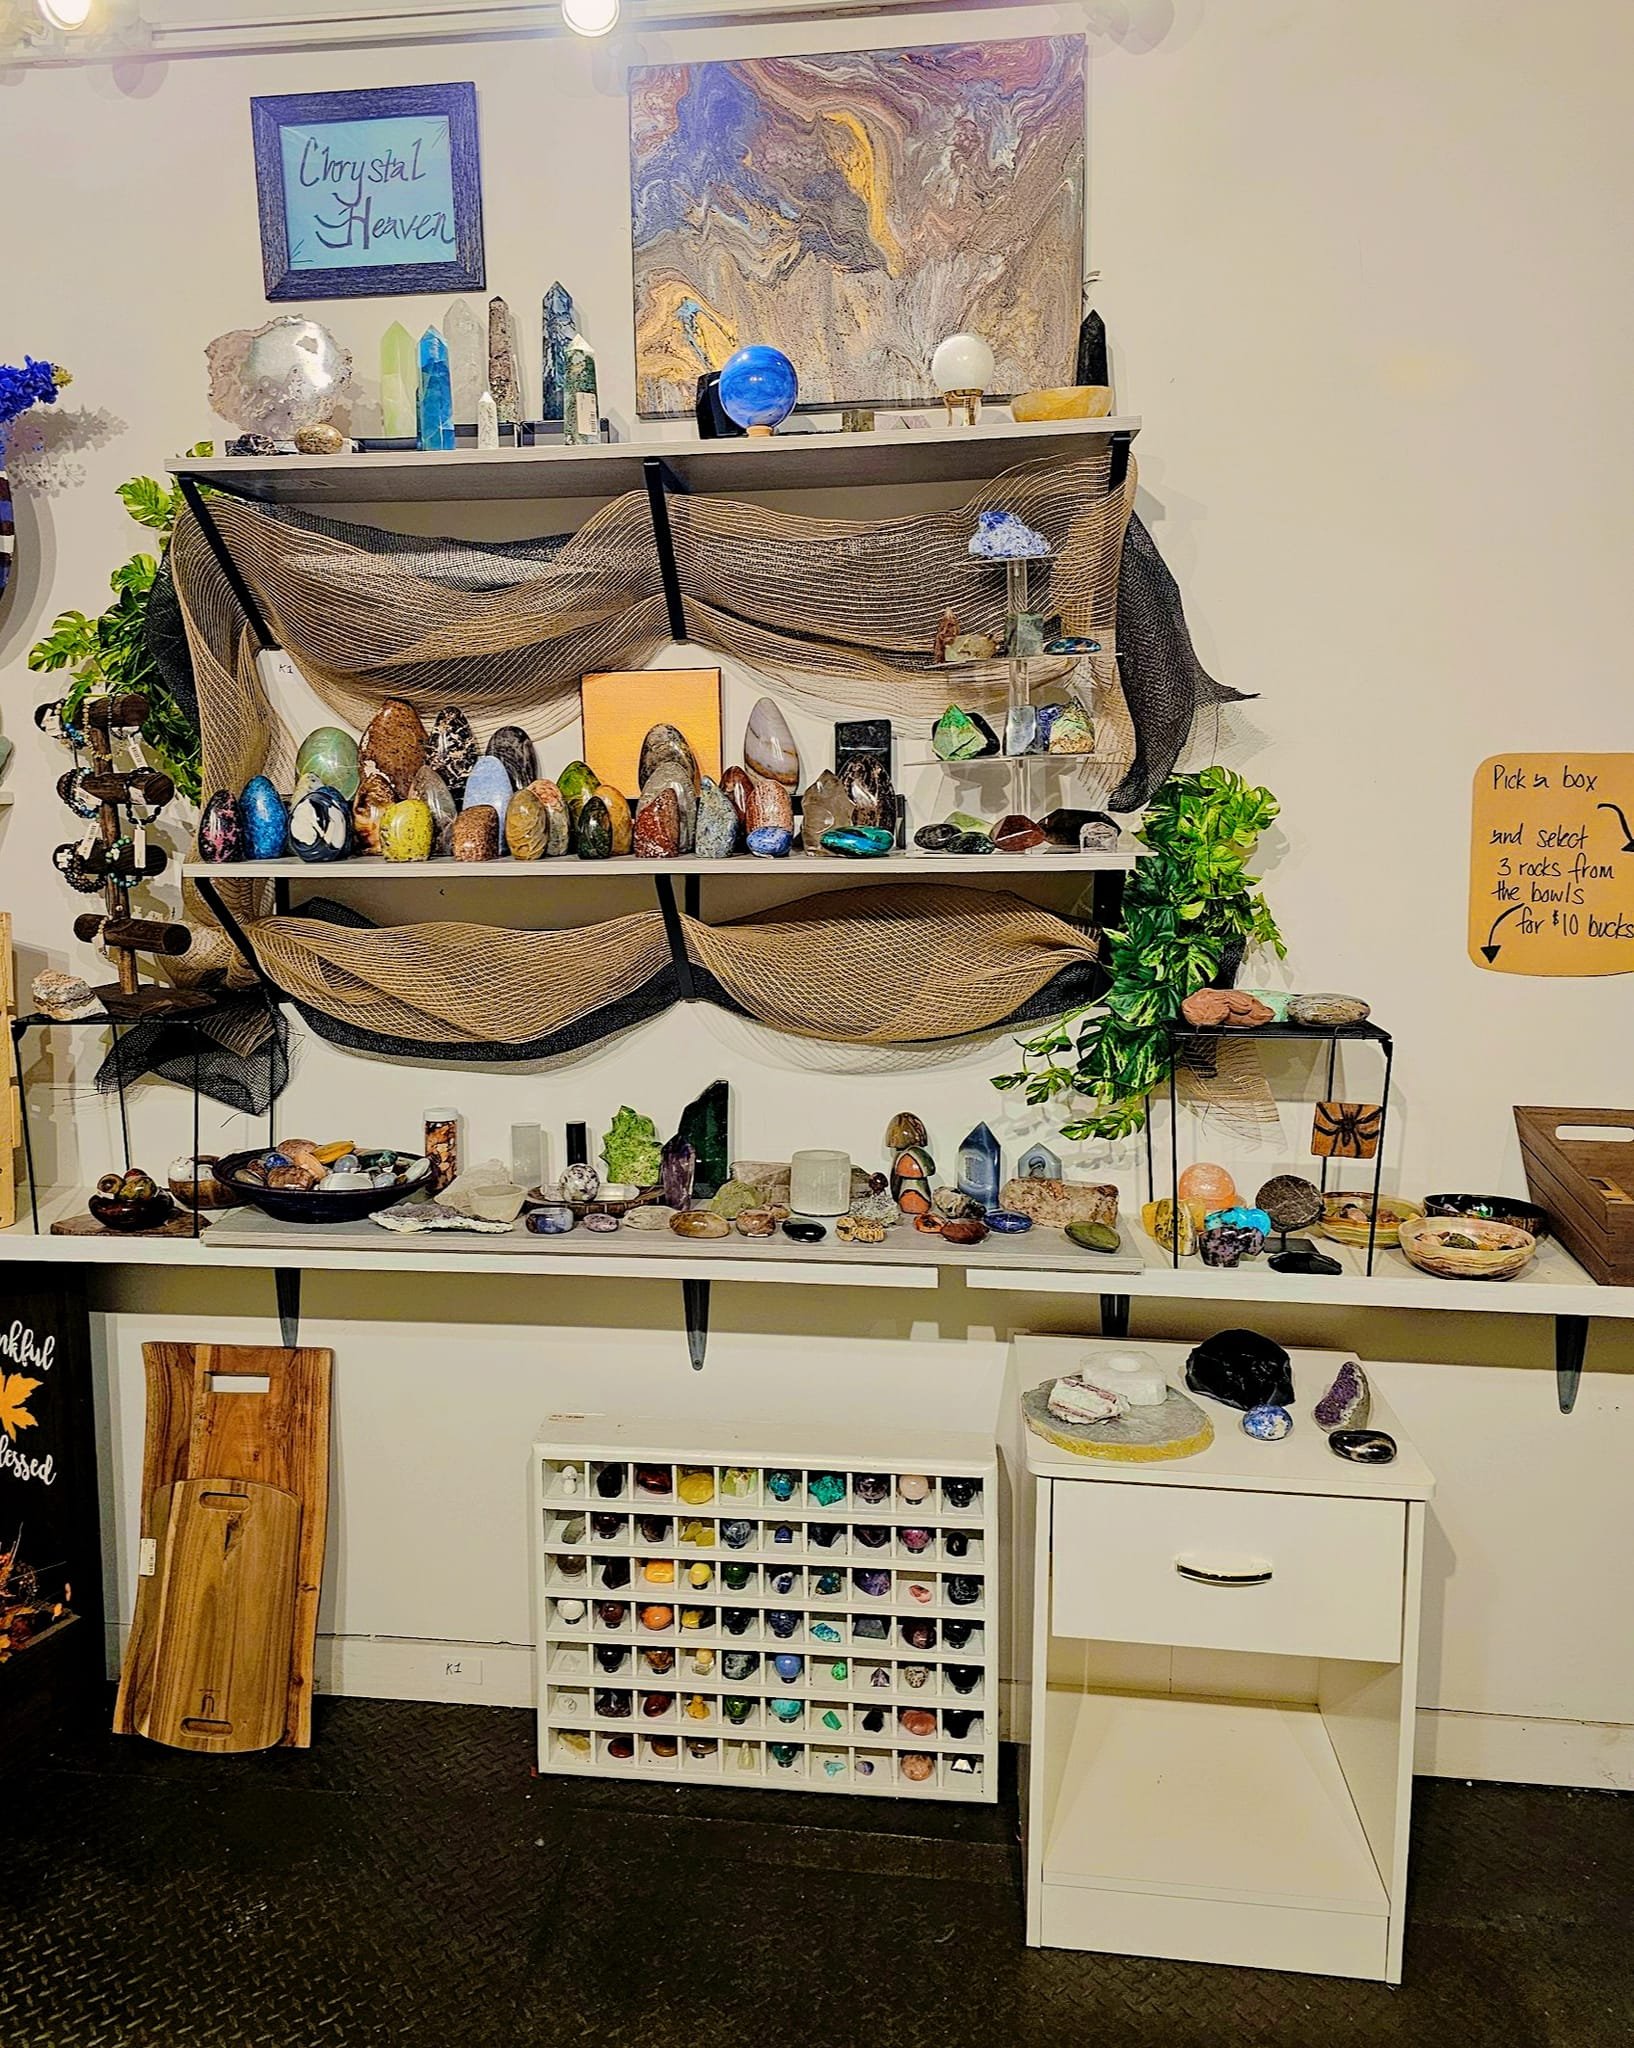 Shop crystals, uniques stones &amp; more from Chrystal Heaven, located inside The York Merchant along with dozens of other unique small businesses. Open Tuesday-Thursday 11am-5pm, Friday 11am-6pm, Saturday 9am-5pm, &amp; Sunday 12pm-4pm.